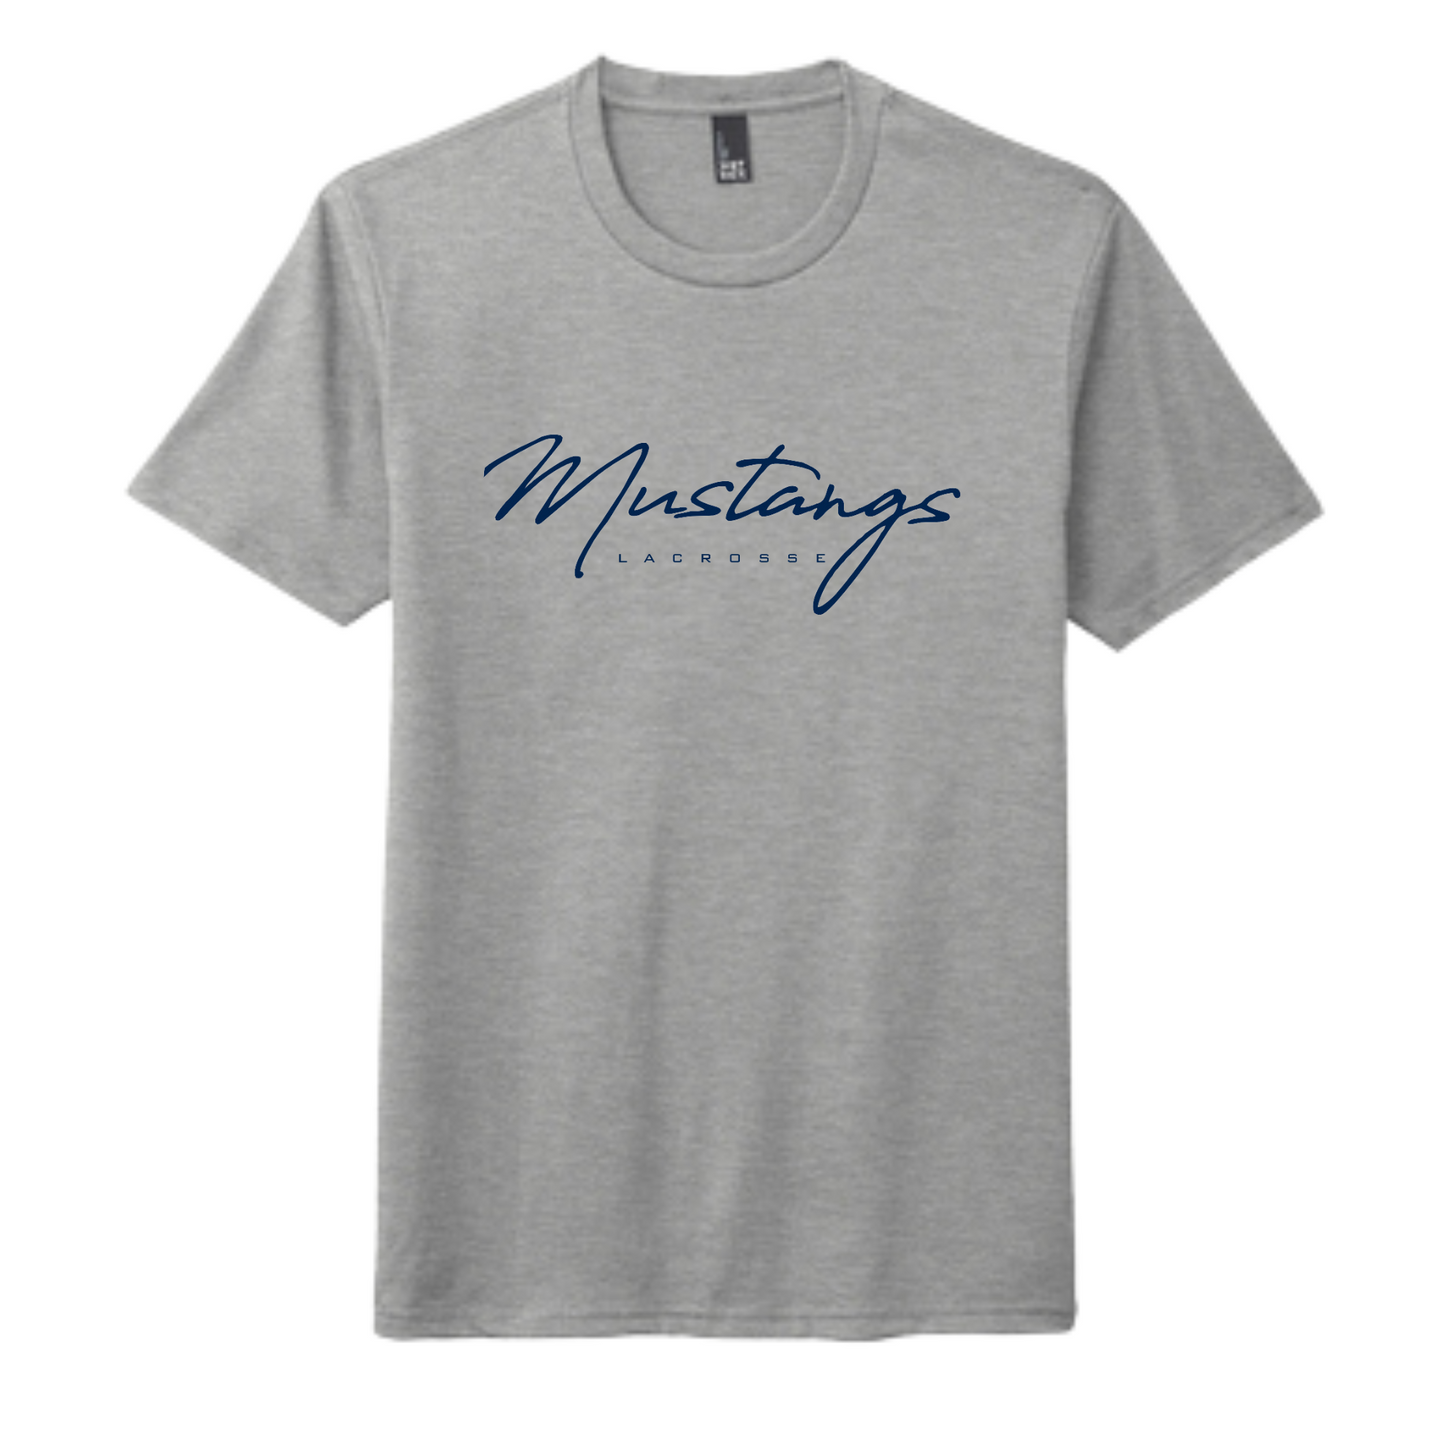 MEDWAY YOUTH LACROSSE MUSTANGS ADULT TEE - GRAY